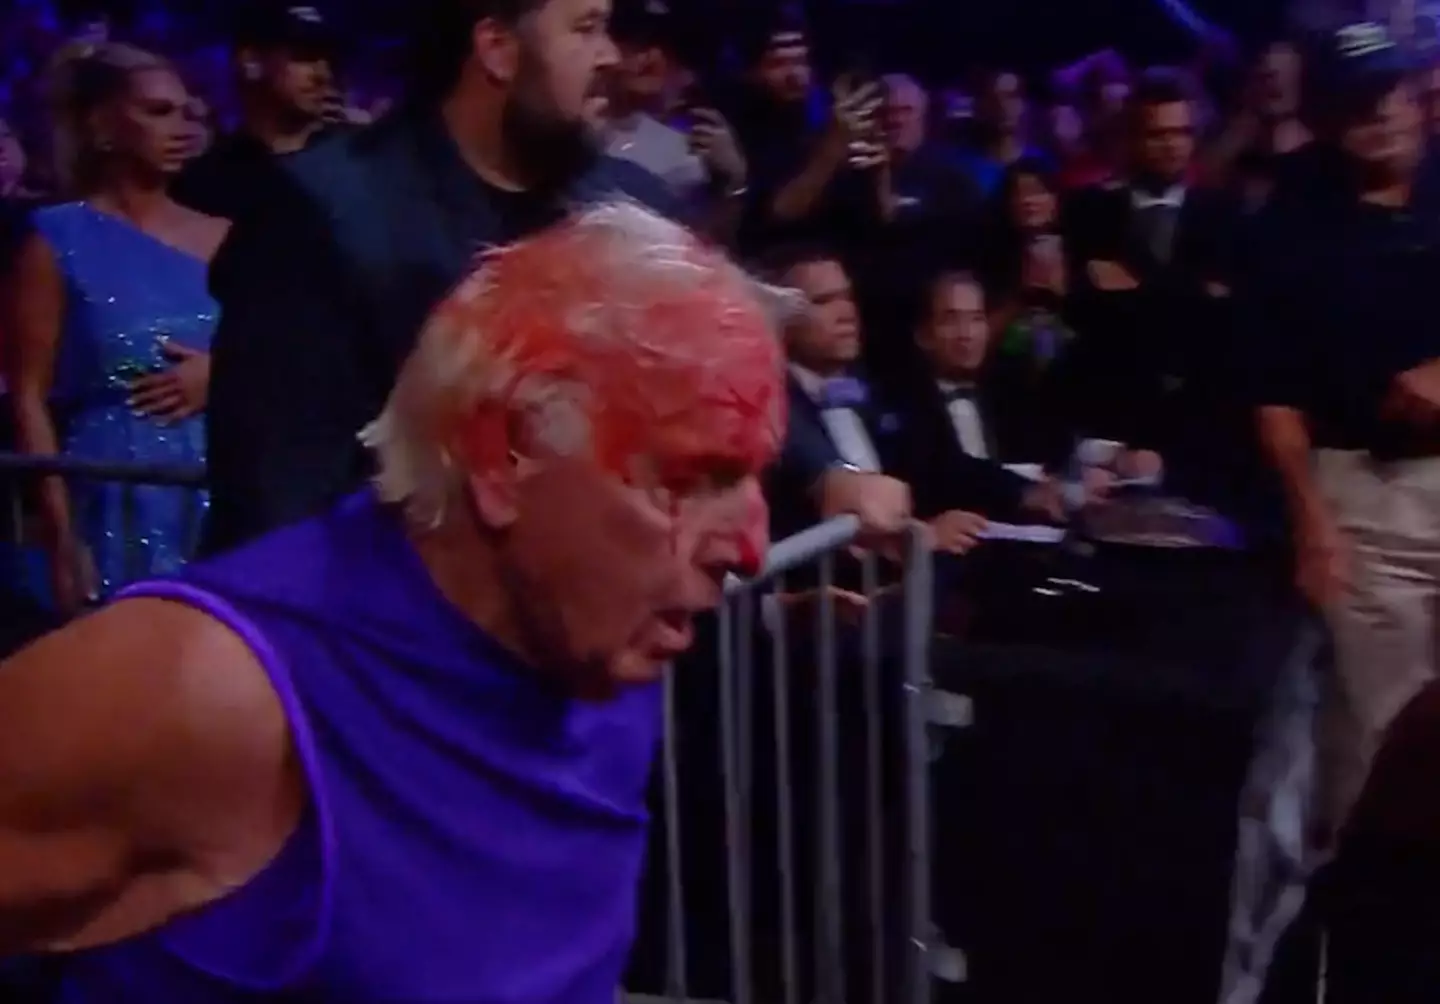 Ric Flair blacked out twice during his final WWE match.